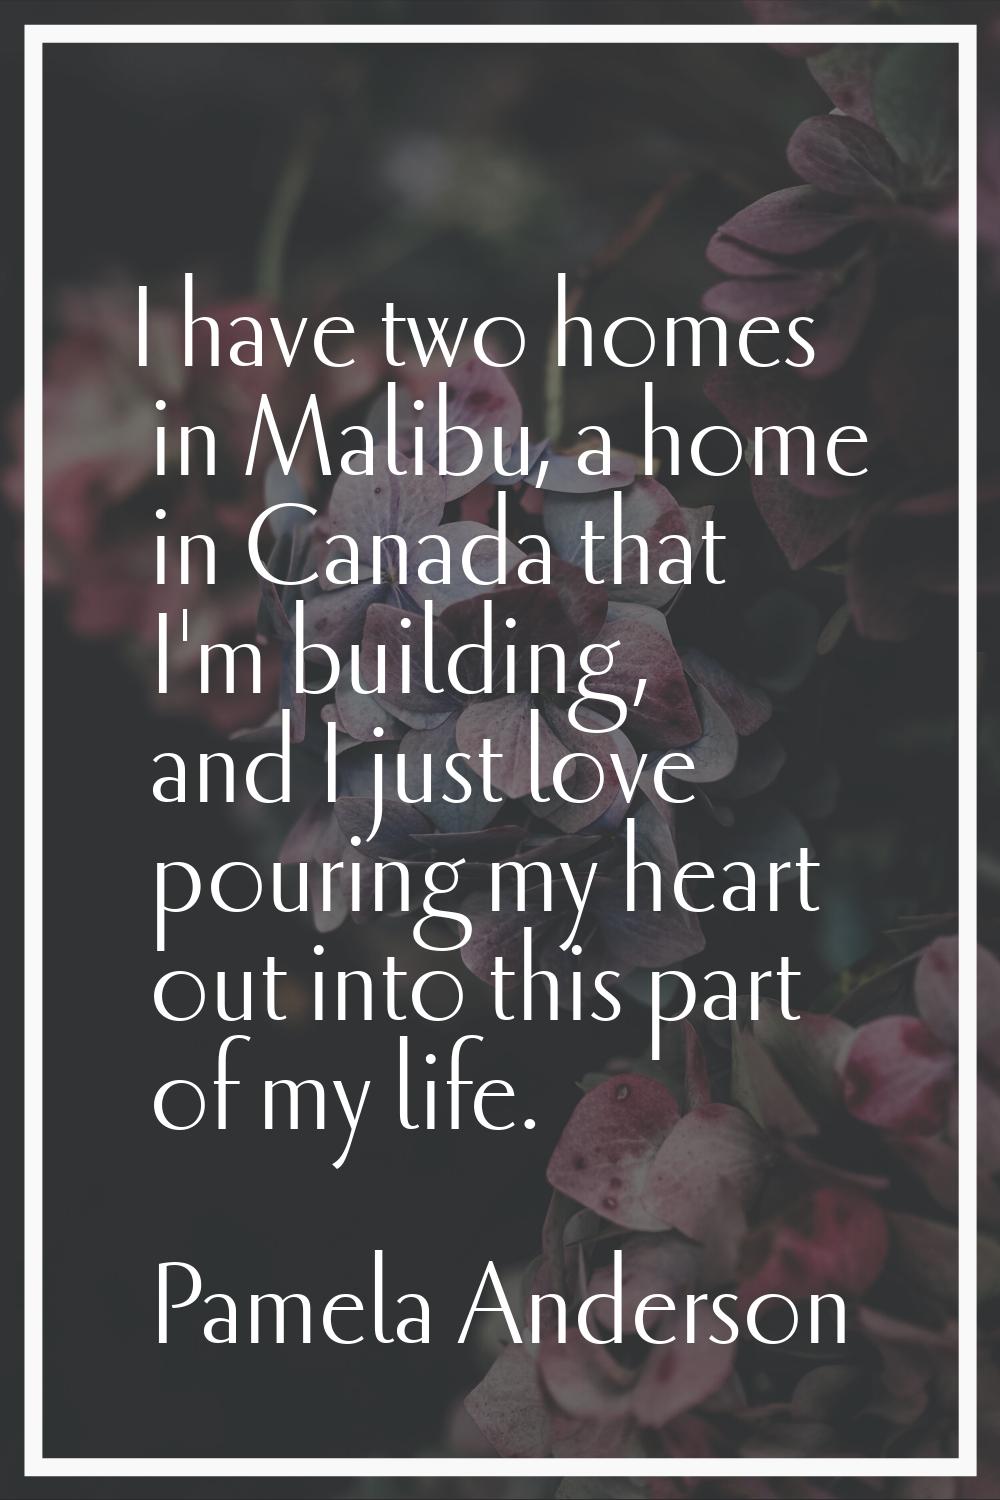 I have two homes in Malibu, a home in Canada that I'm building, and I just love pouring my heart ou